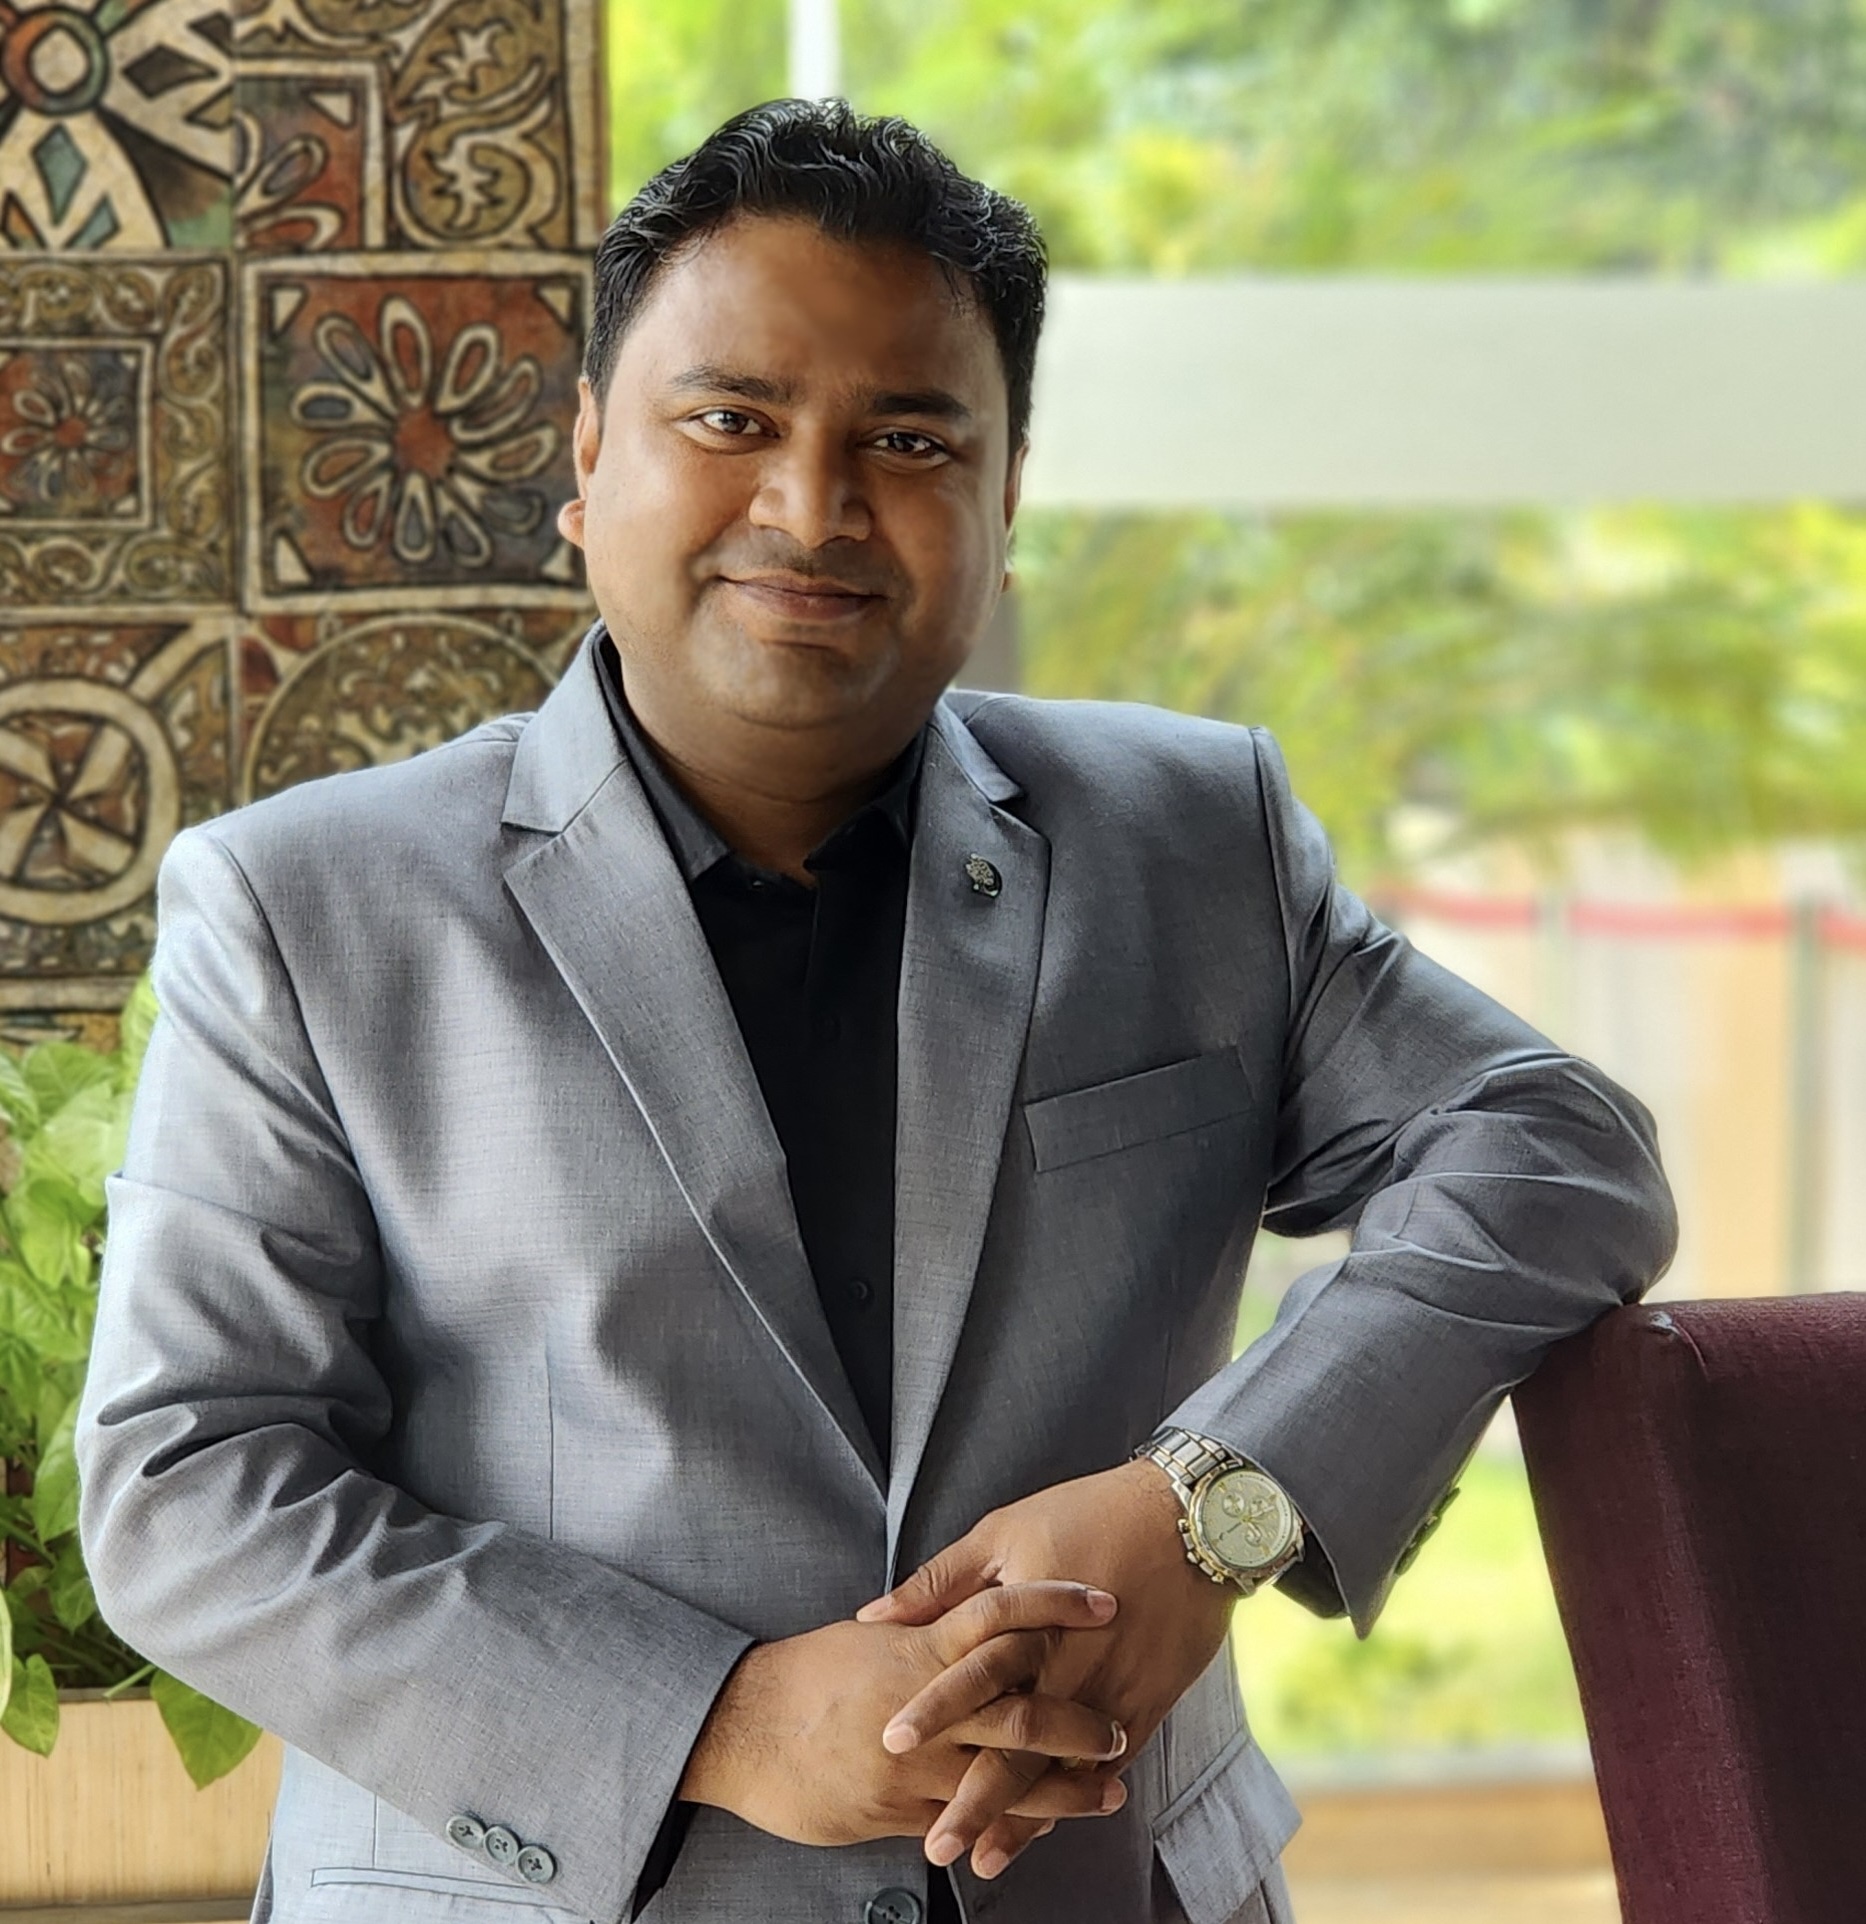 DoubleTree by Hilton Gurugram Baani Square announces the appointment of Jyotiraditya Kumar as the Food & Beverage Manager